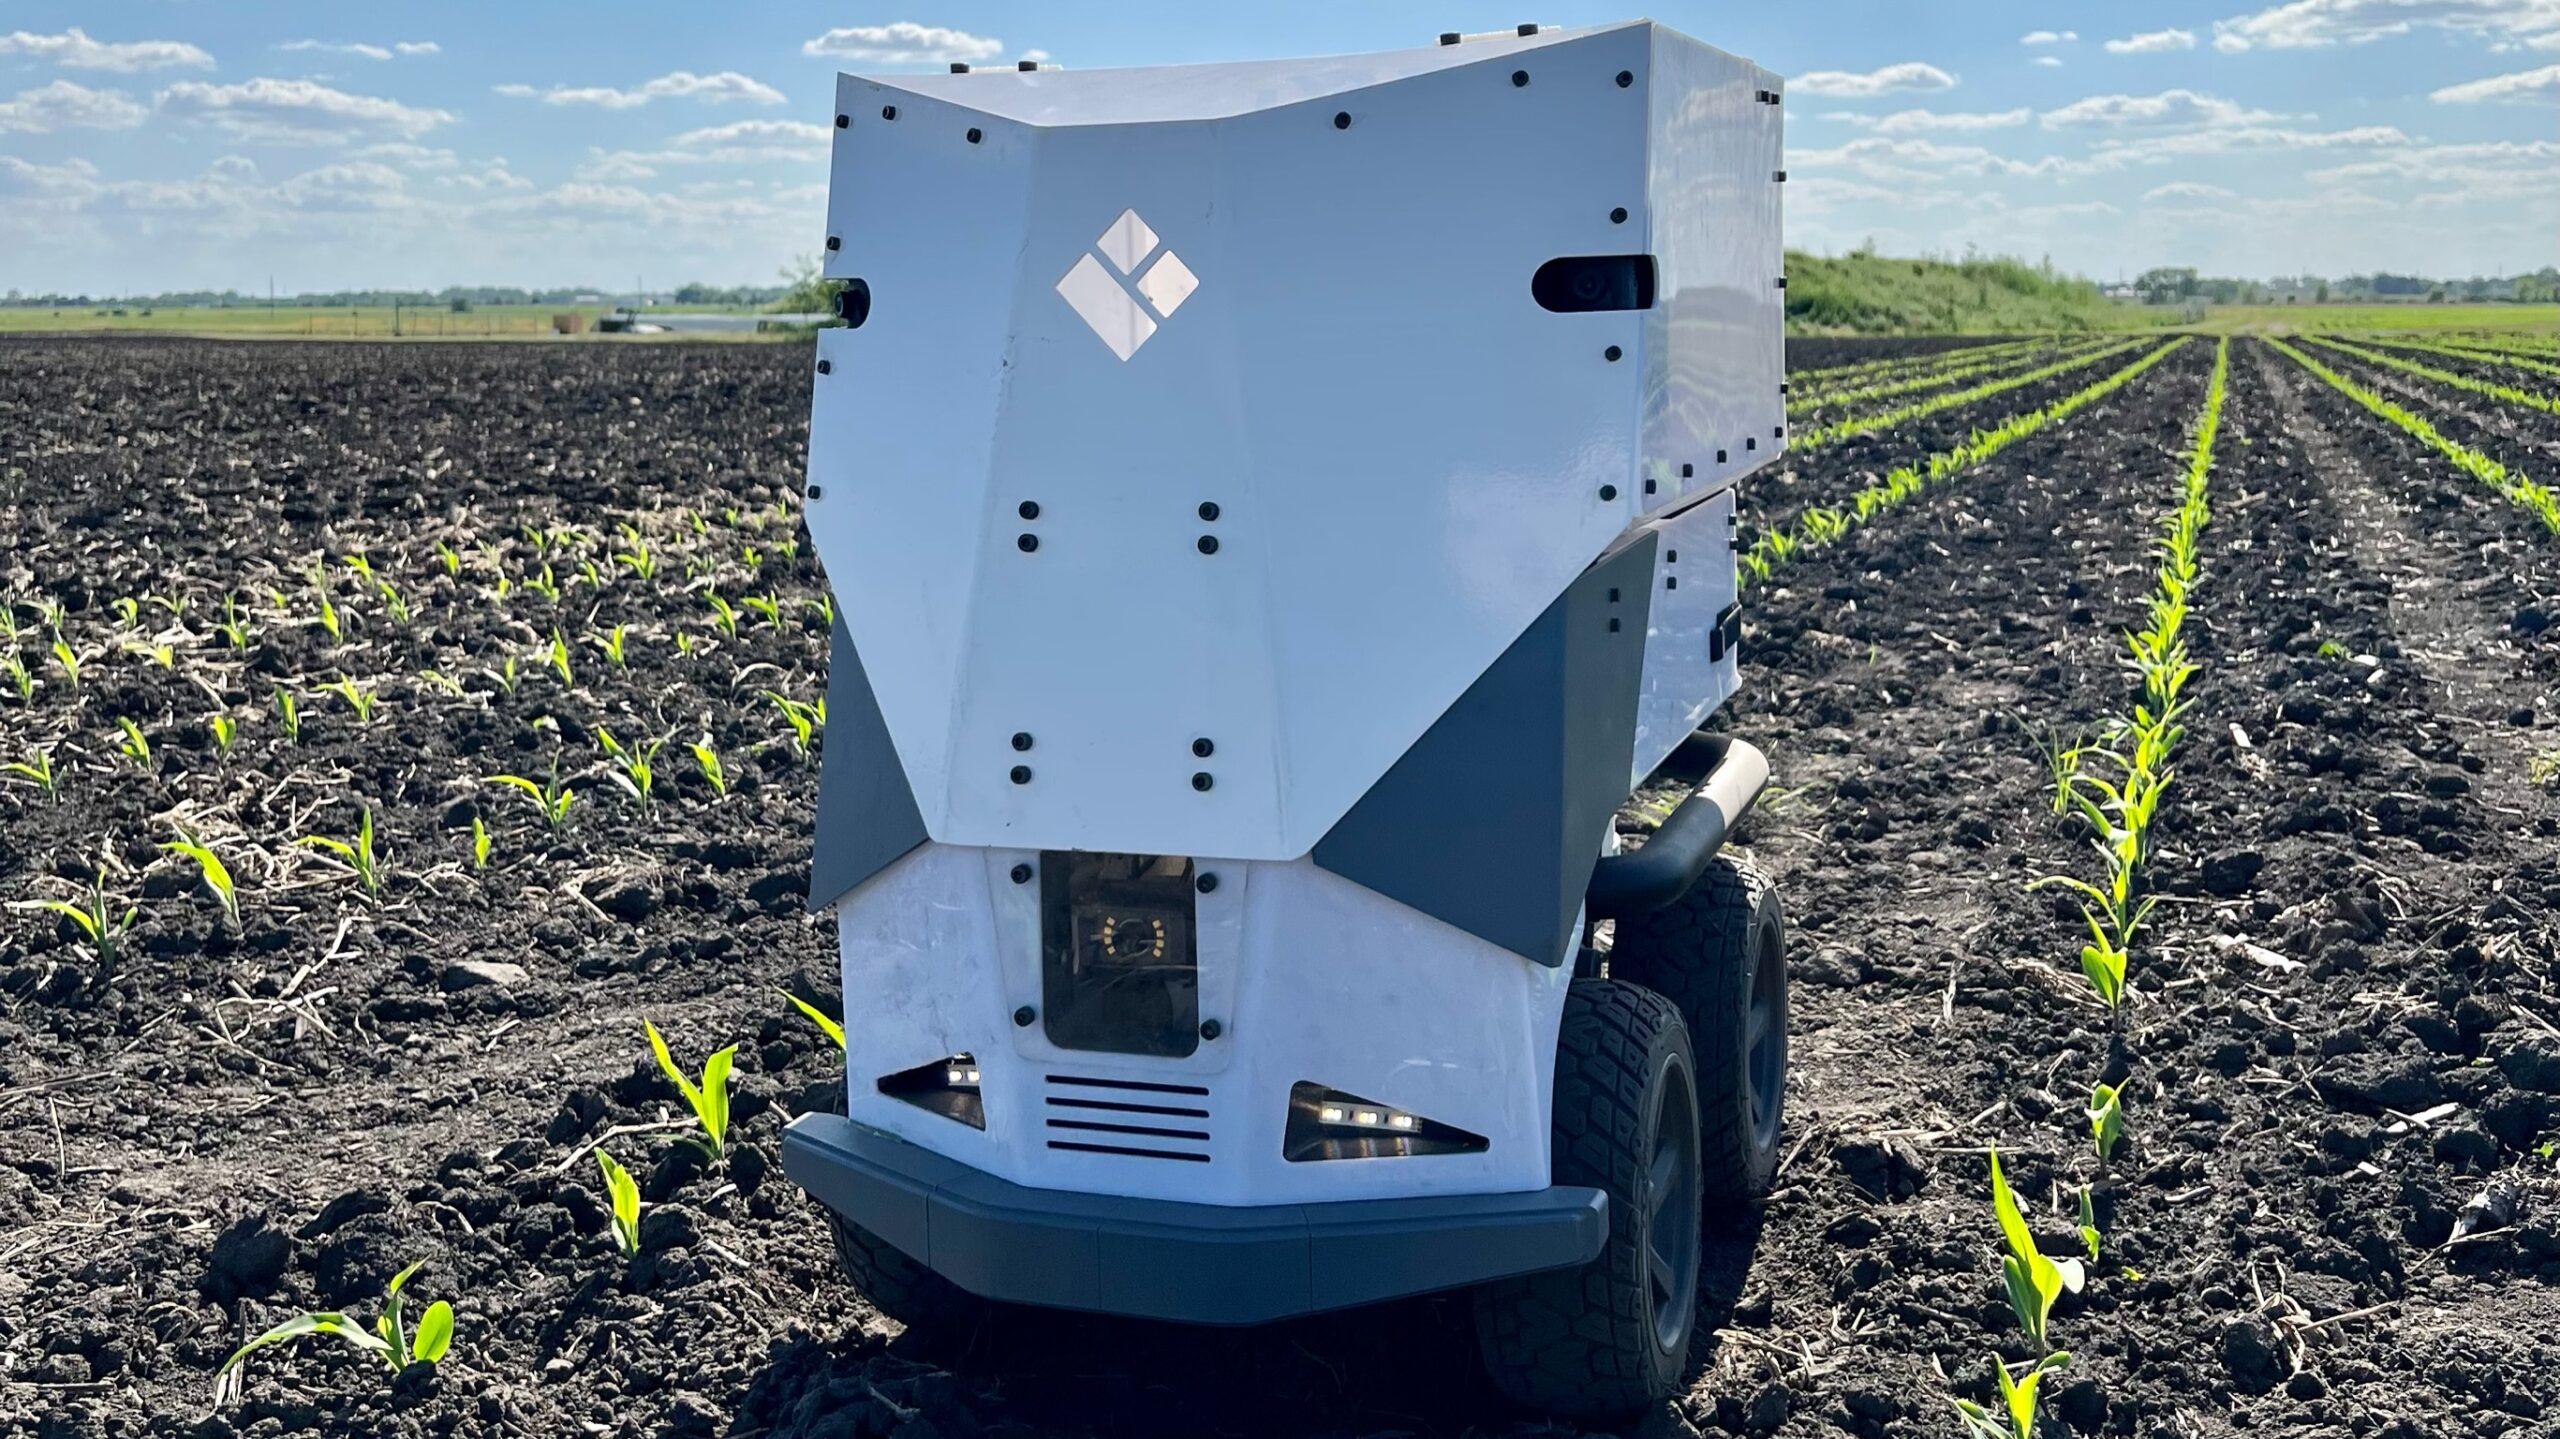 A photo of EarthSense's cover crop robot in a crop plot.